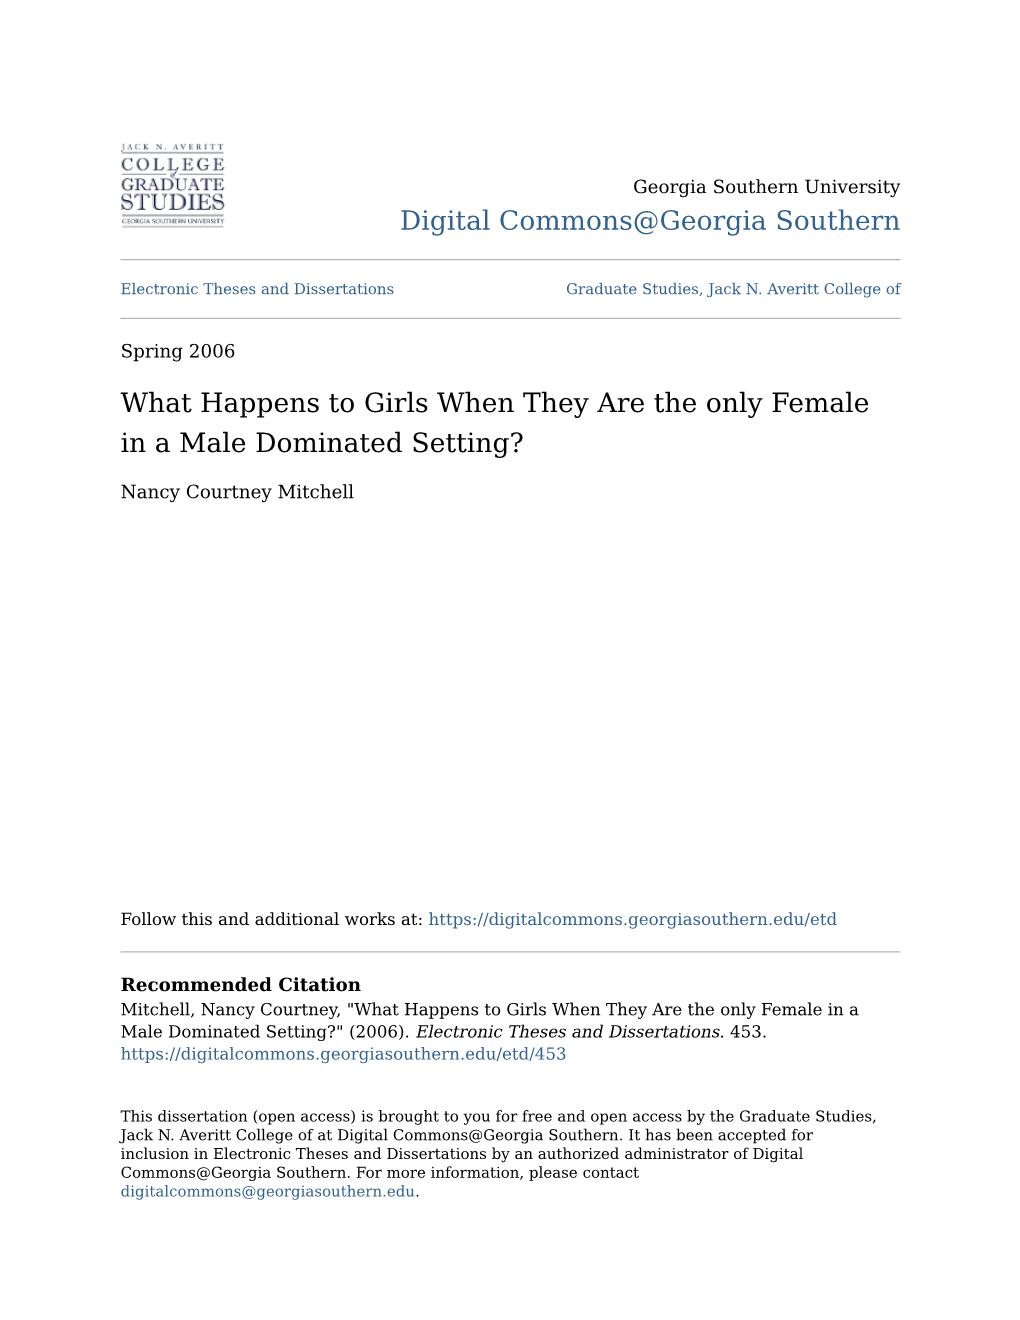 What Happens to Girls When They Are the Only Female in a Male Dominated Setting?